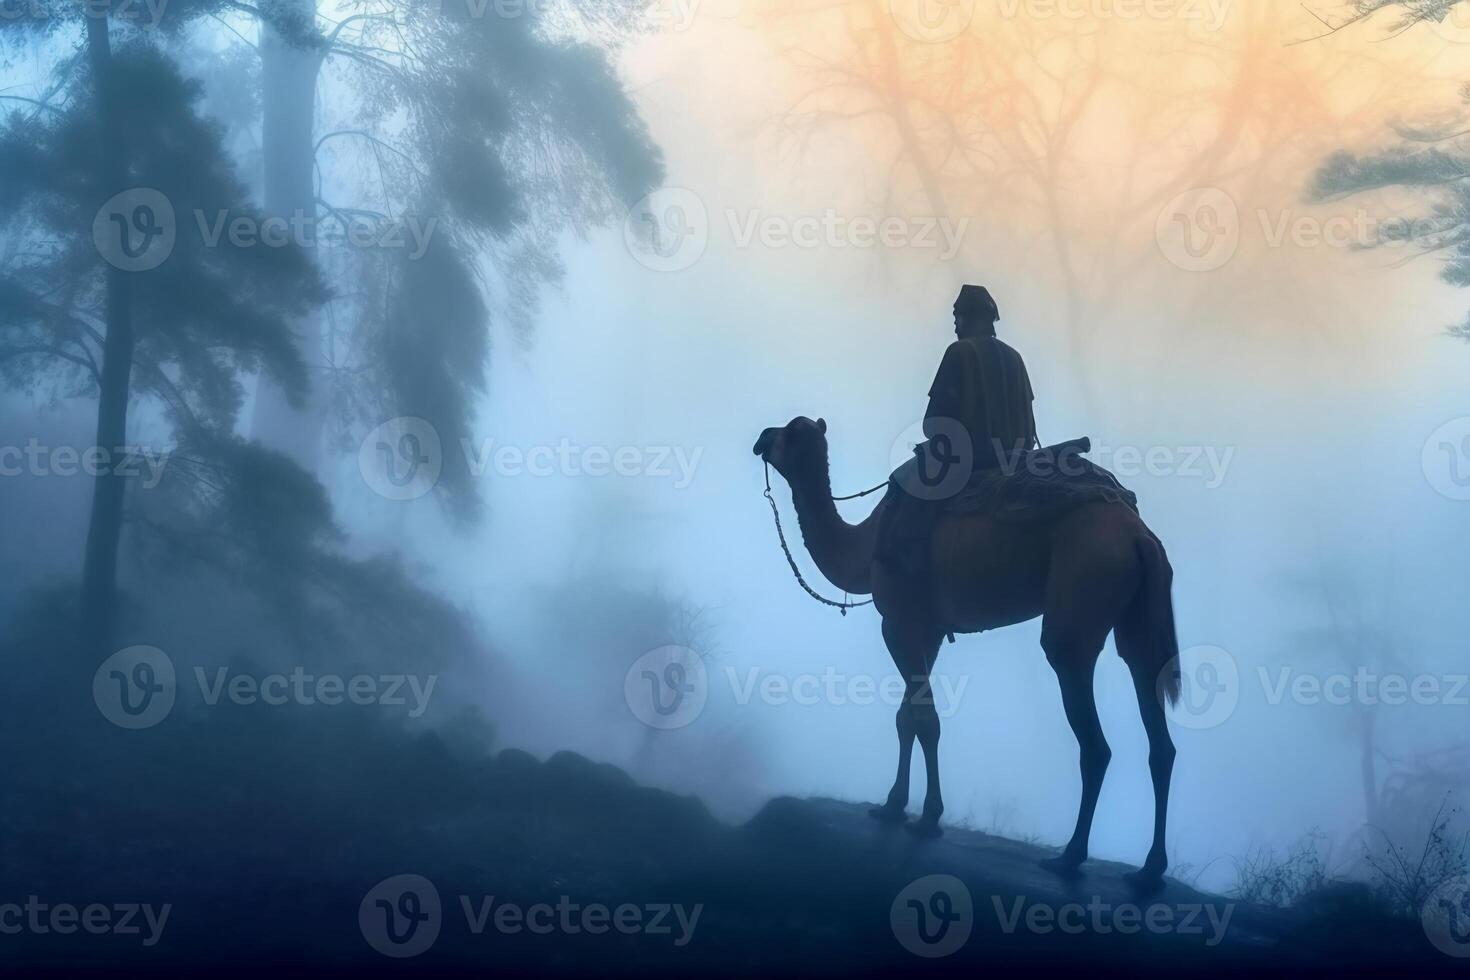 Soldier on a camel, foggy area, silhouette. photo